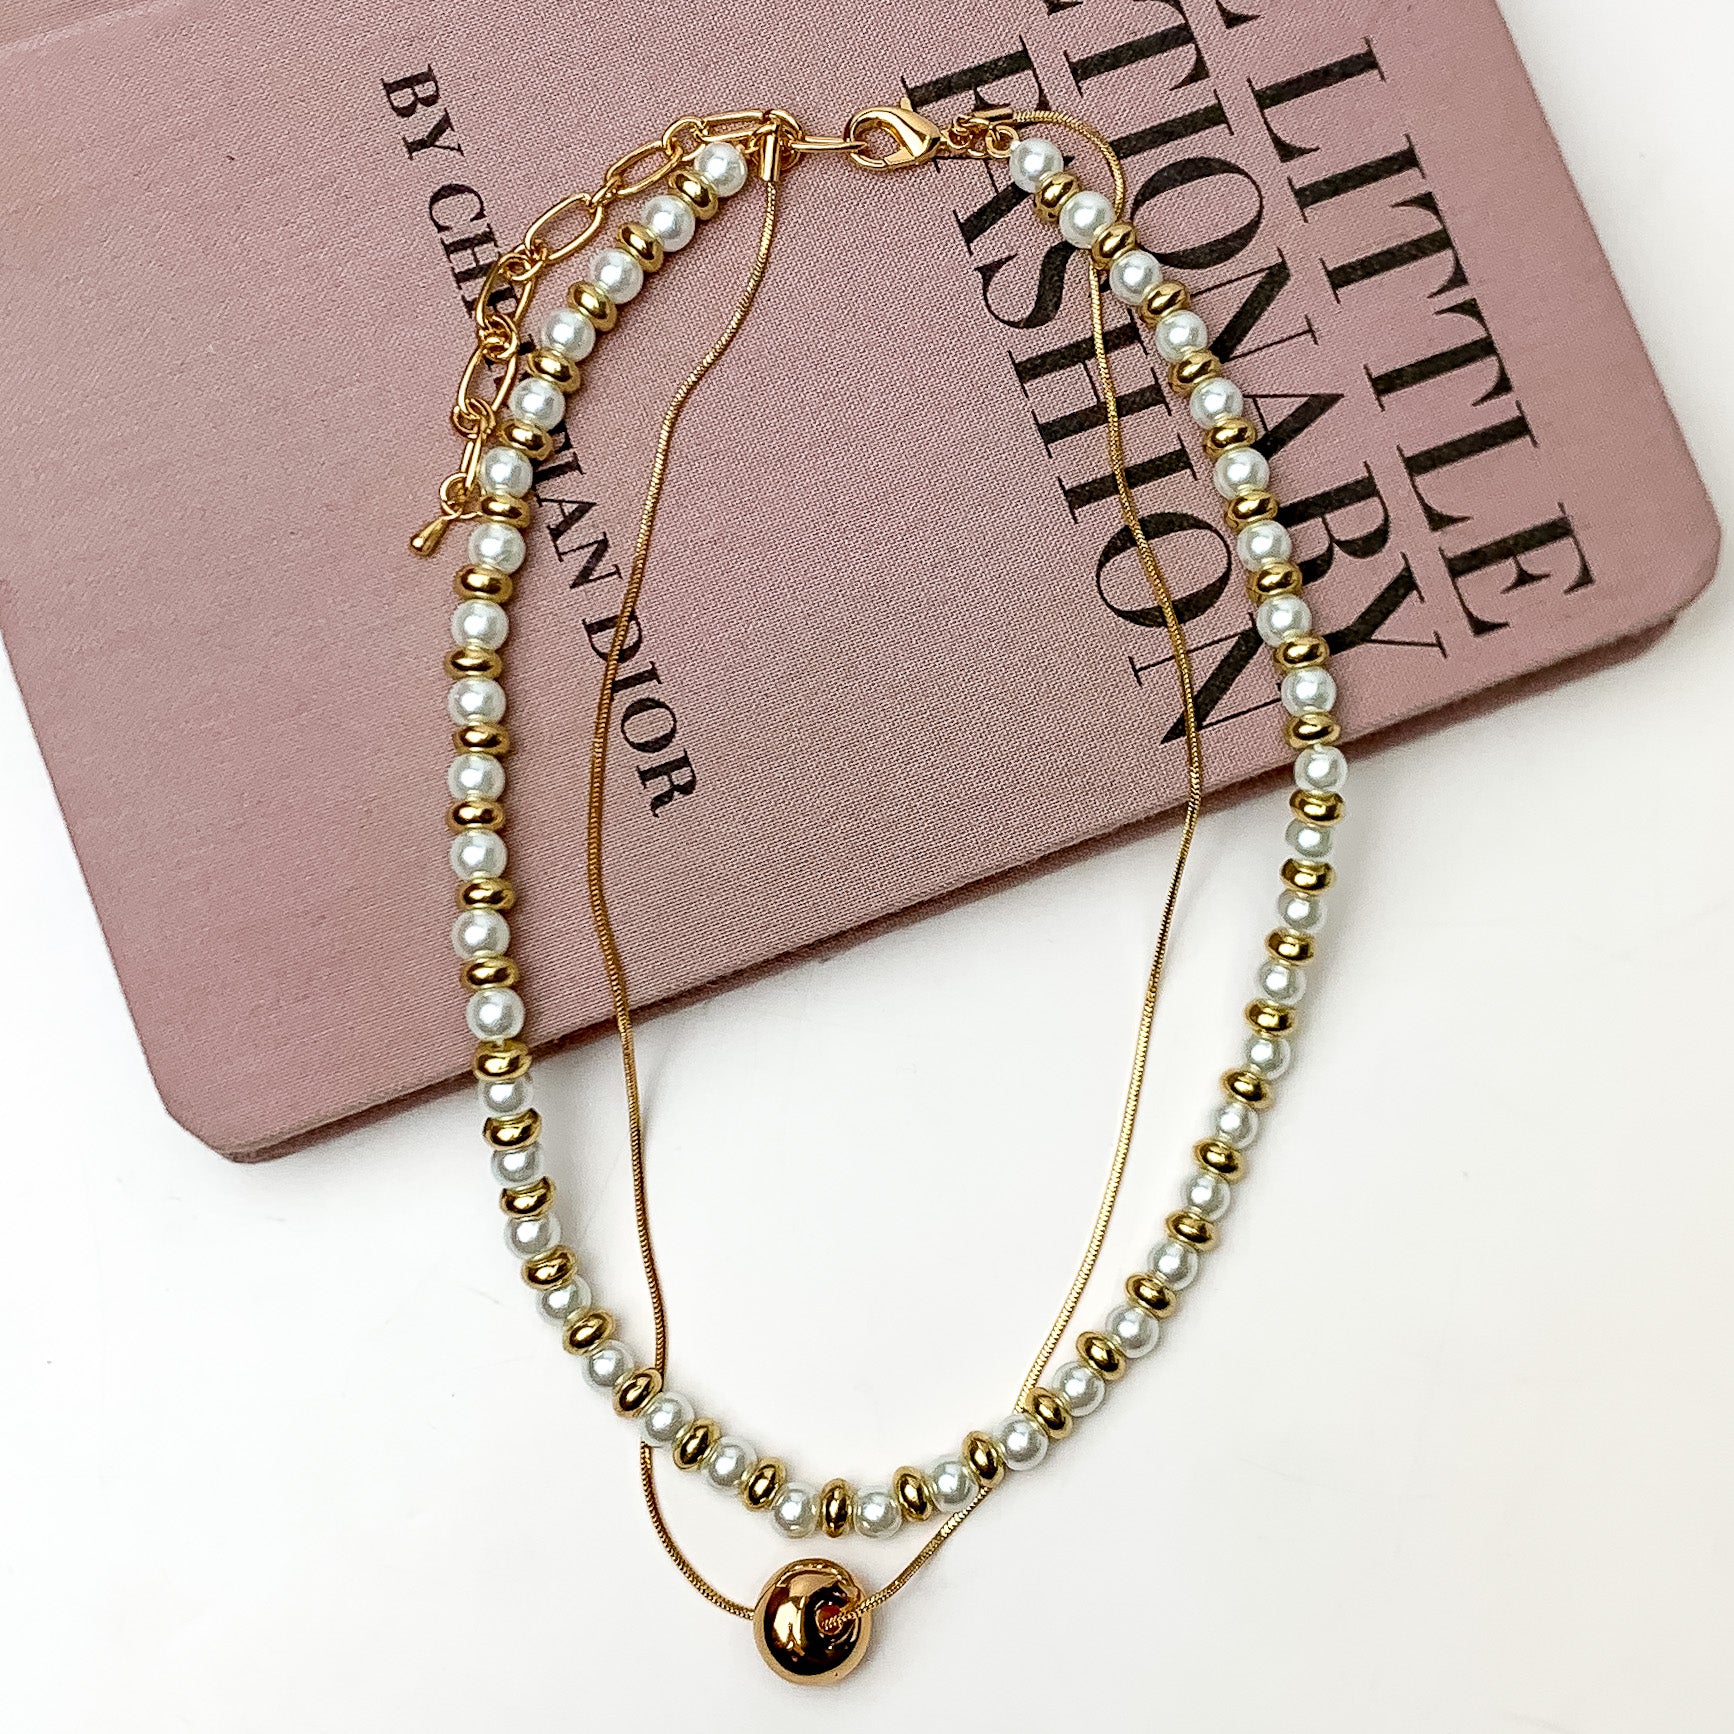 Pictured is a double strand gold and white beaded necklace with a thin strand that has a single gold bead. This necklace is pictured laying partially on a mauve book on a white background.  